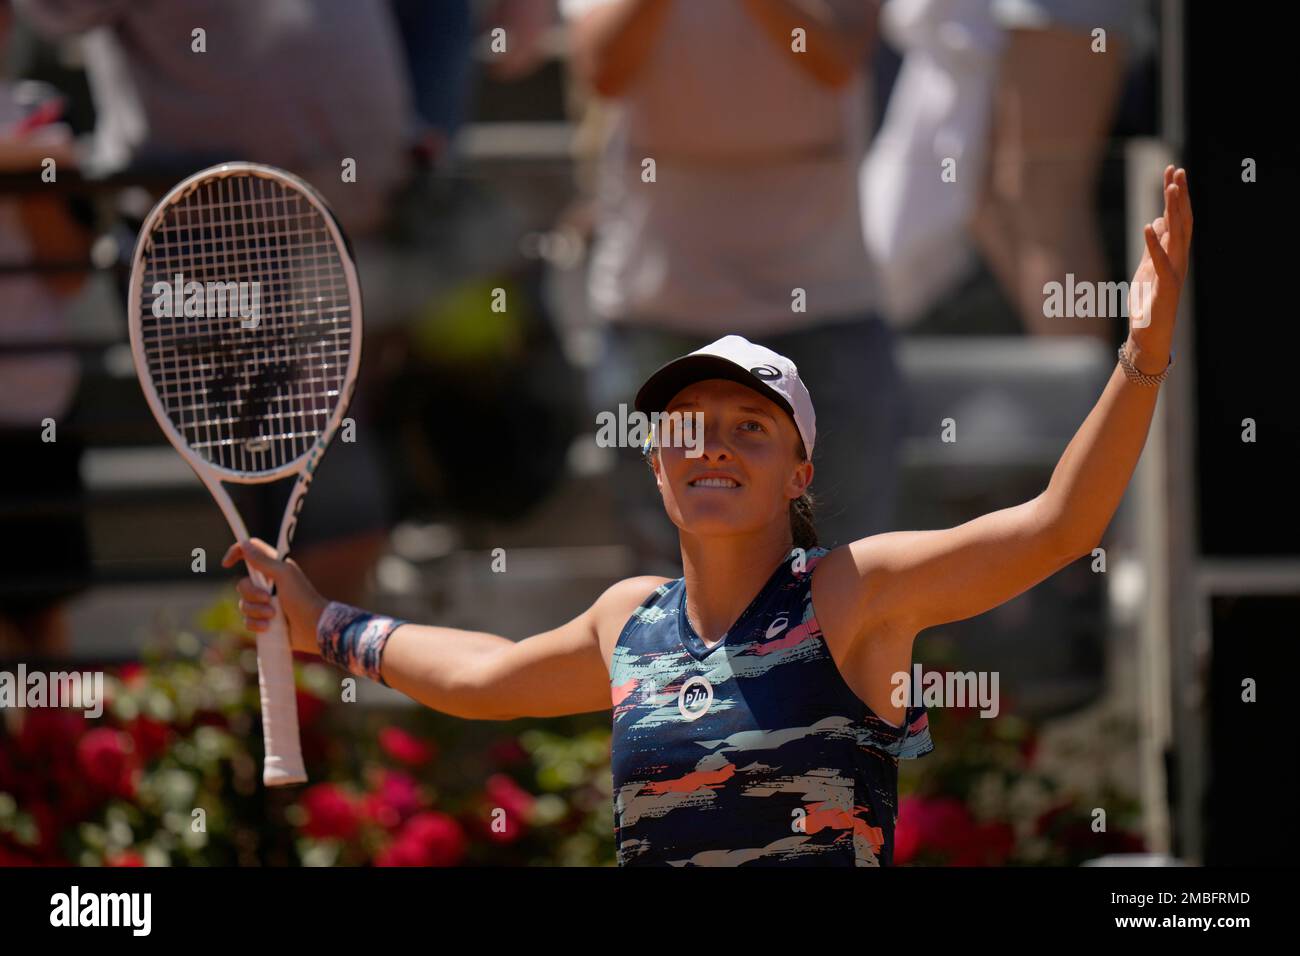 Iga Swiatek of Poland celebrates after winning her semifinal match against Aryna Sabalenka from Belarus at the Italian Open tennis tournament, in Rome, Saturday, May 14, 2022